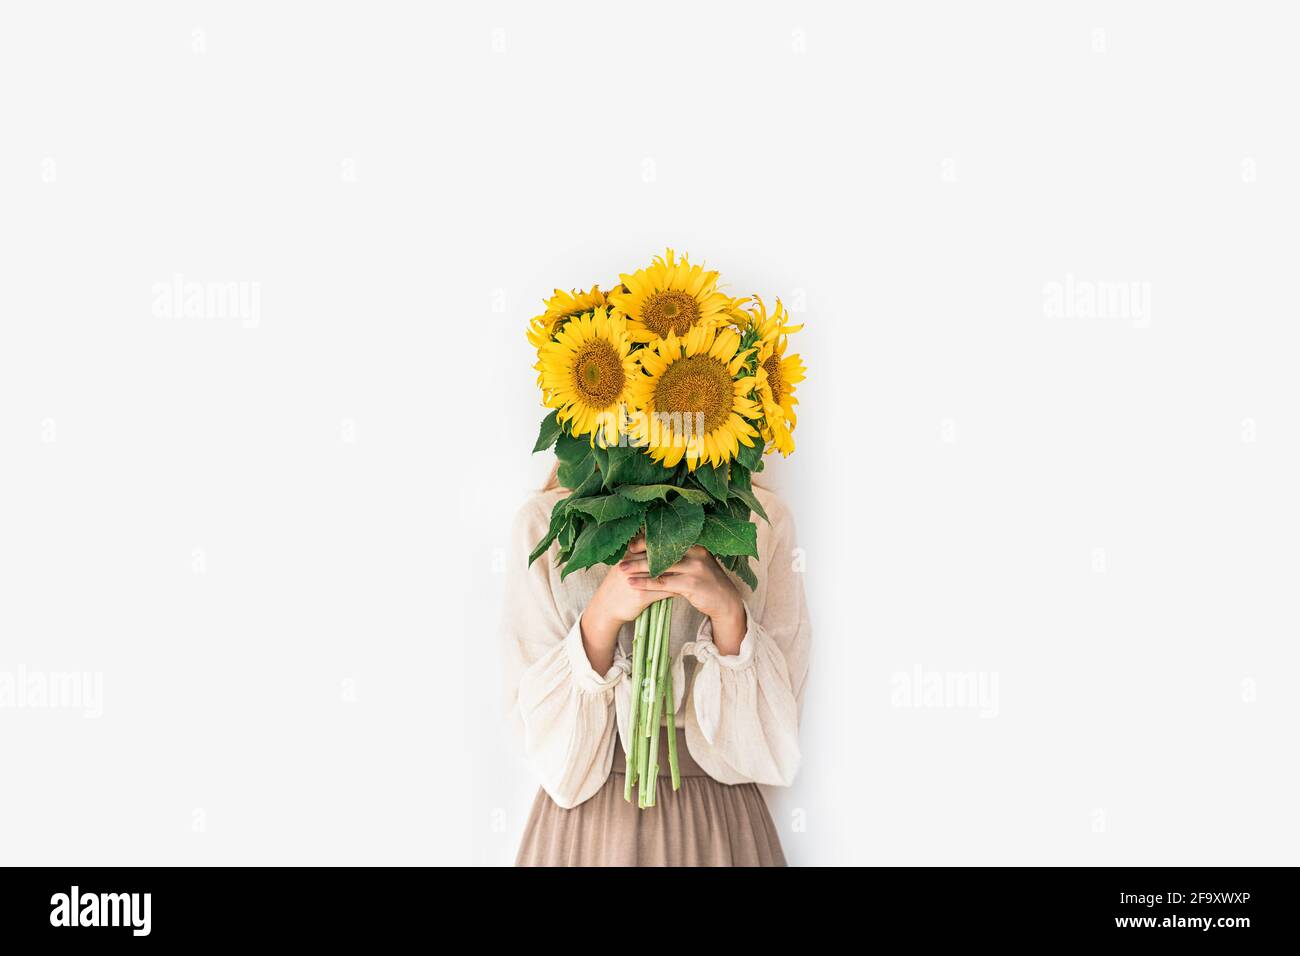 Beautiful young woman in linen dress holding sunflowers bouquet on white background. Autumn concept. Stock Photo